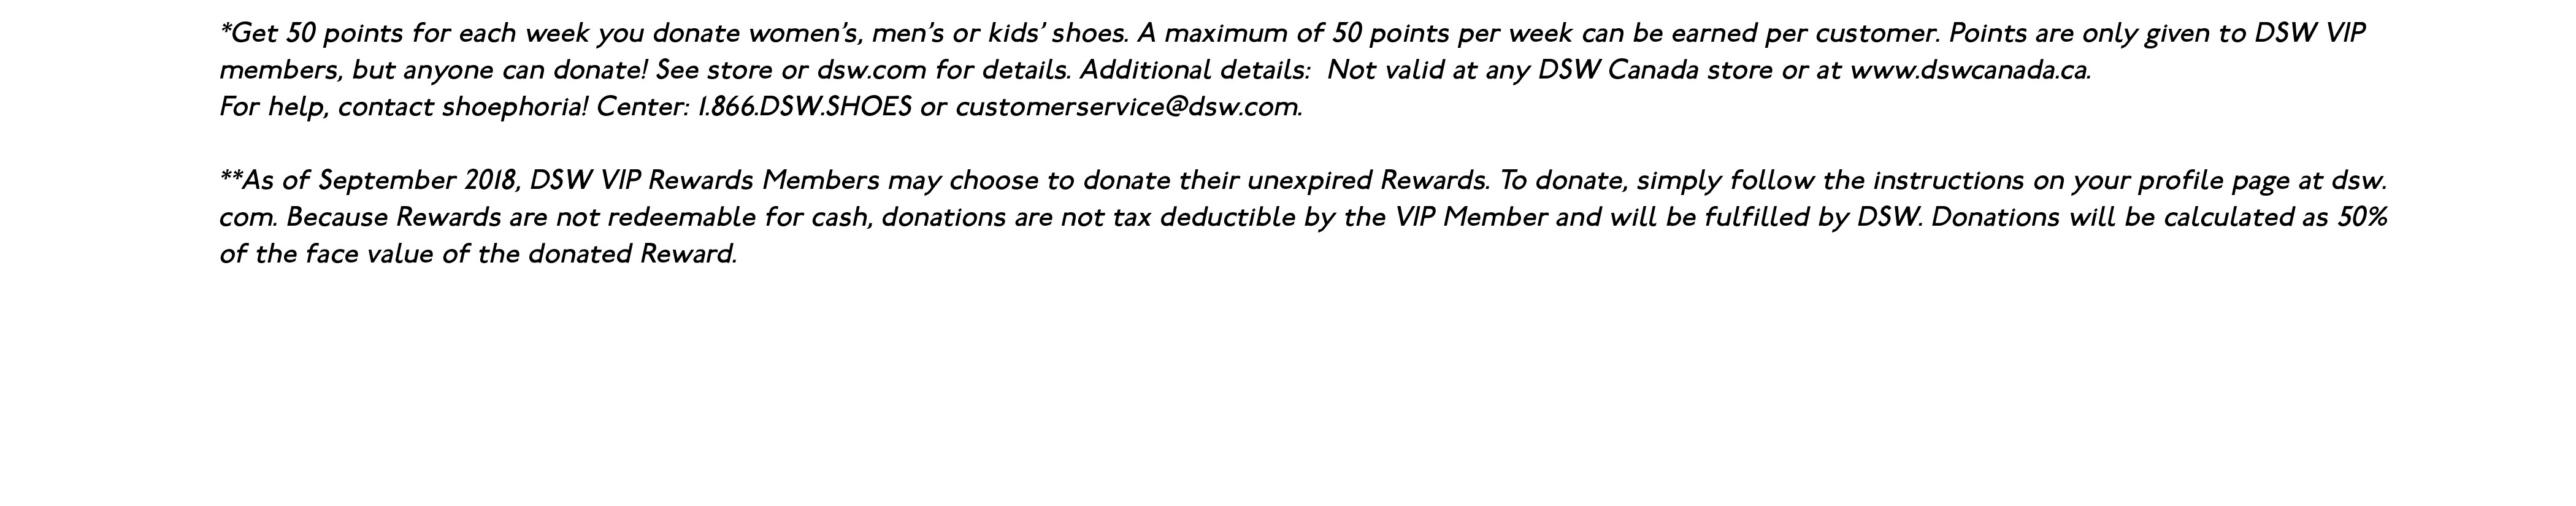 dsw ugg coupon code